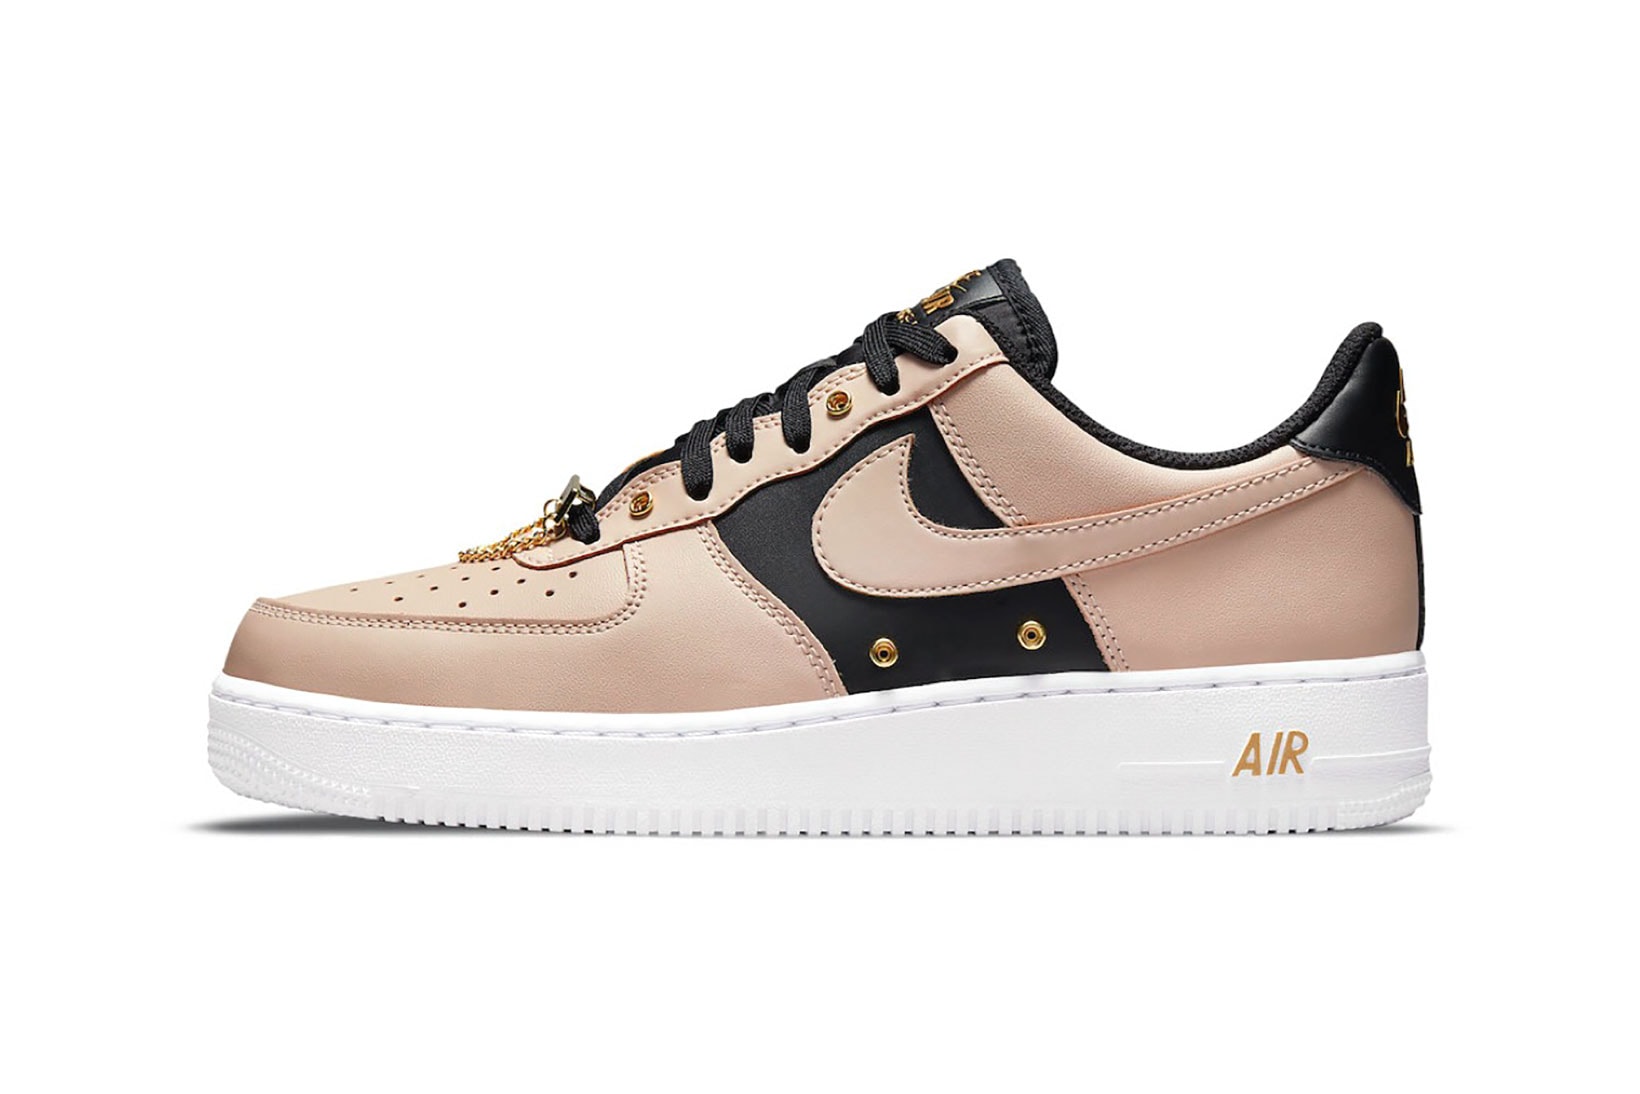 Nike Air Force 1 AF1 Particle Beige Tan Black Gold White Sneakers Shoes Kicks Footwear Lateral